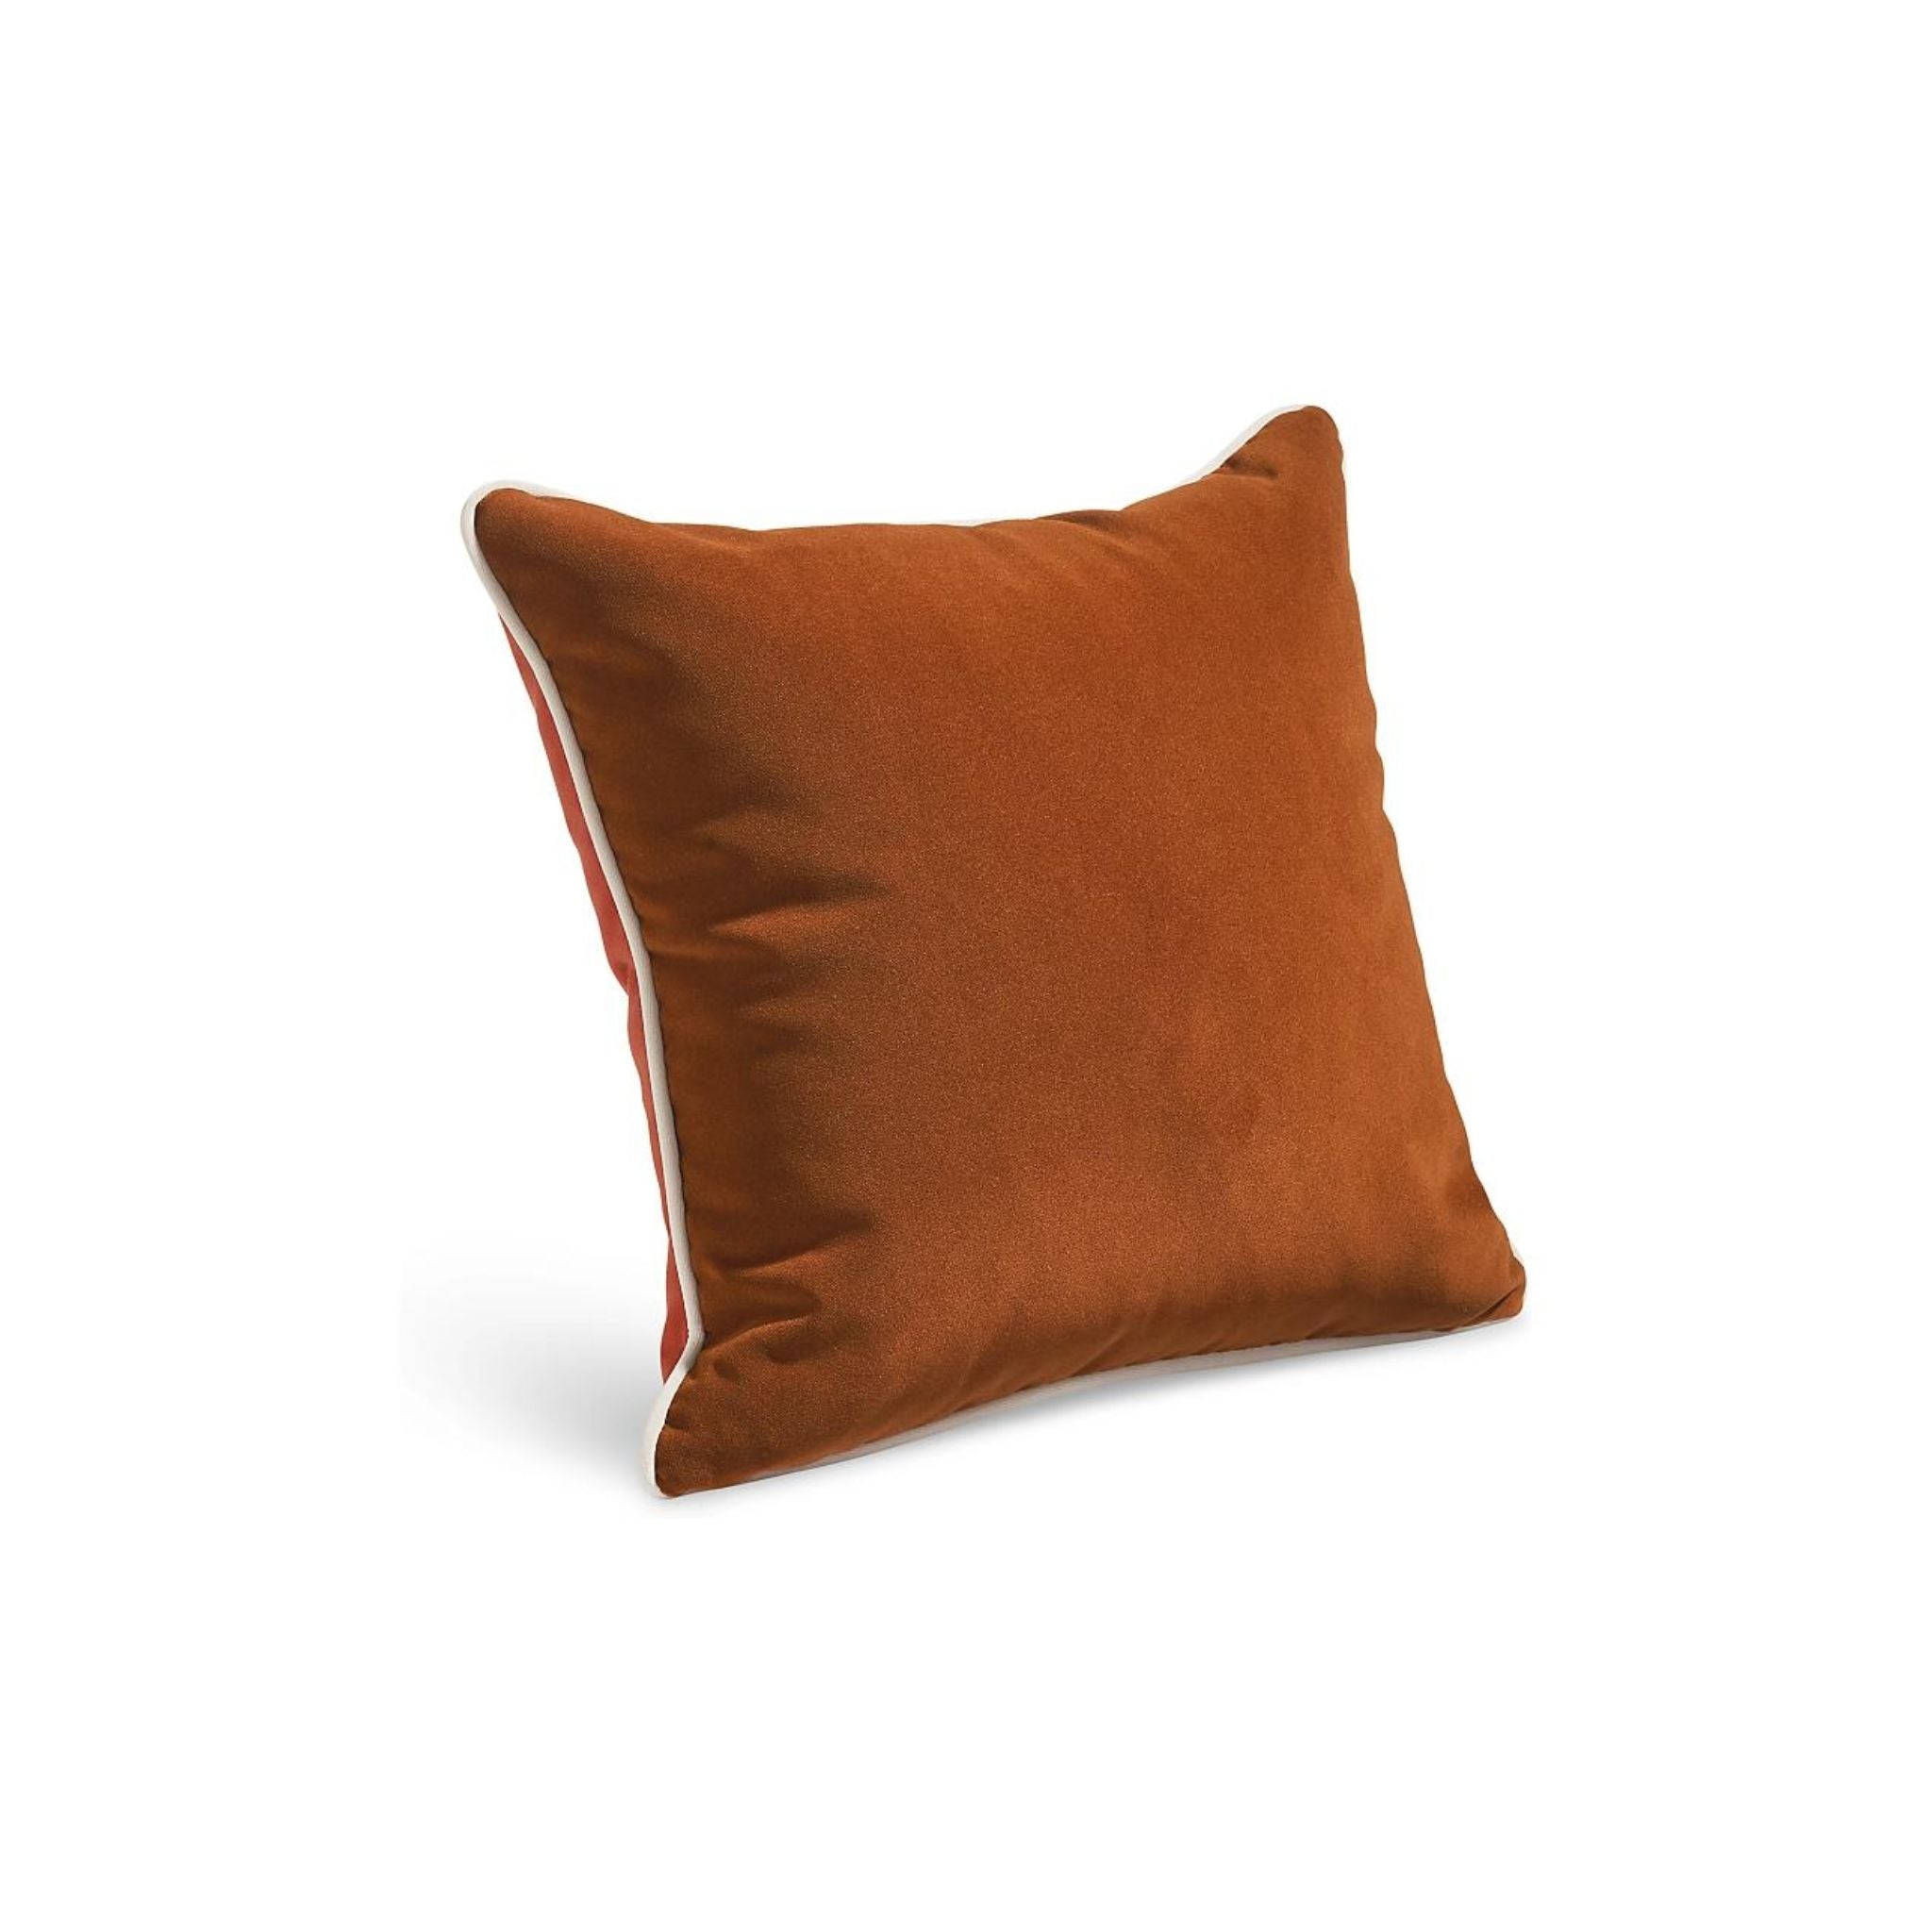 Our Jinx pillow brings the timeless appeal of velvet outdoors. Featuring a two-tone design with a piping border detail, each of these modern outdoor throw pillows is available in timeless colors for easy styling.